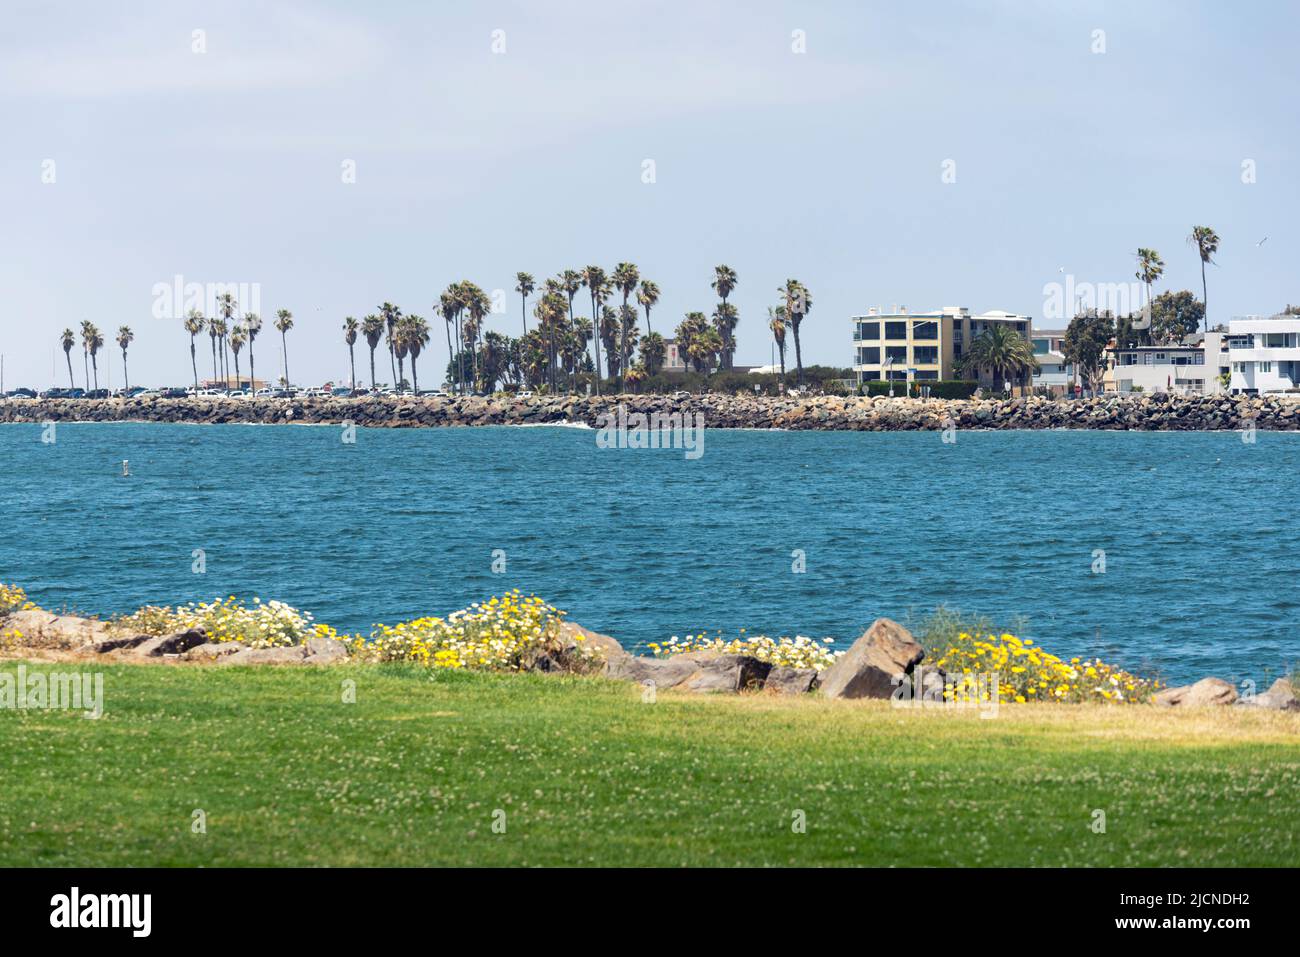 View from the Mission Bay Channel Jetty. San Diego, California, USA. Stock Photo